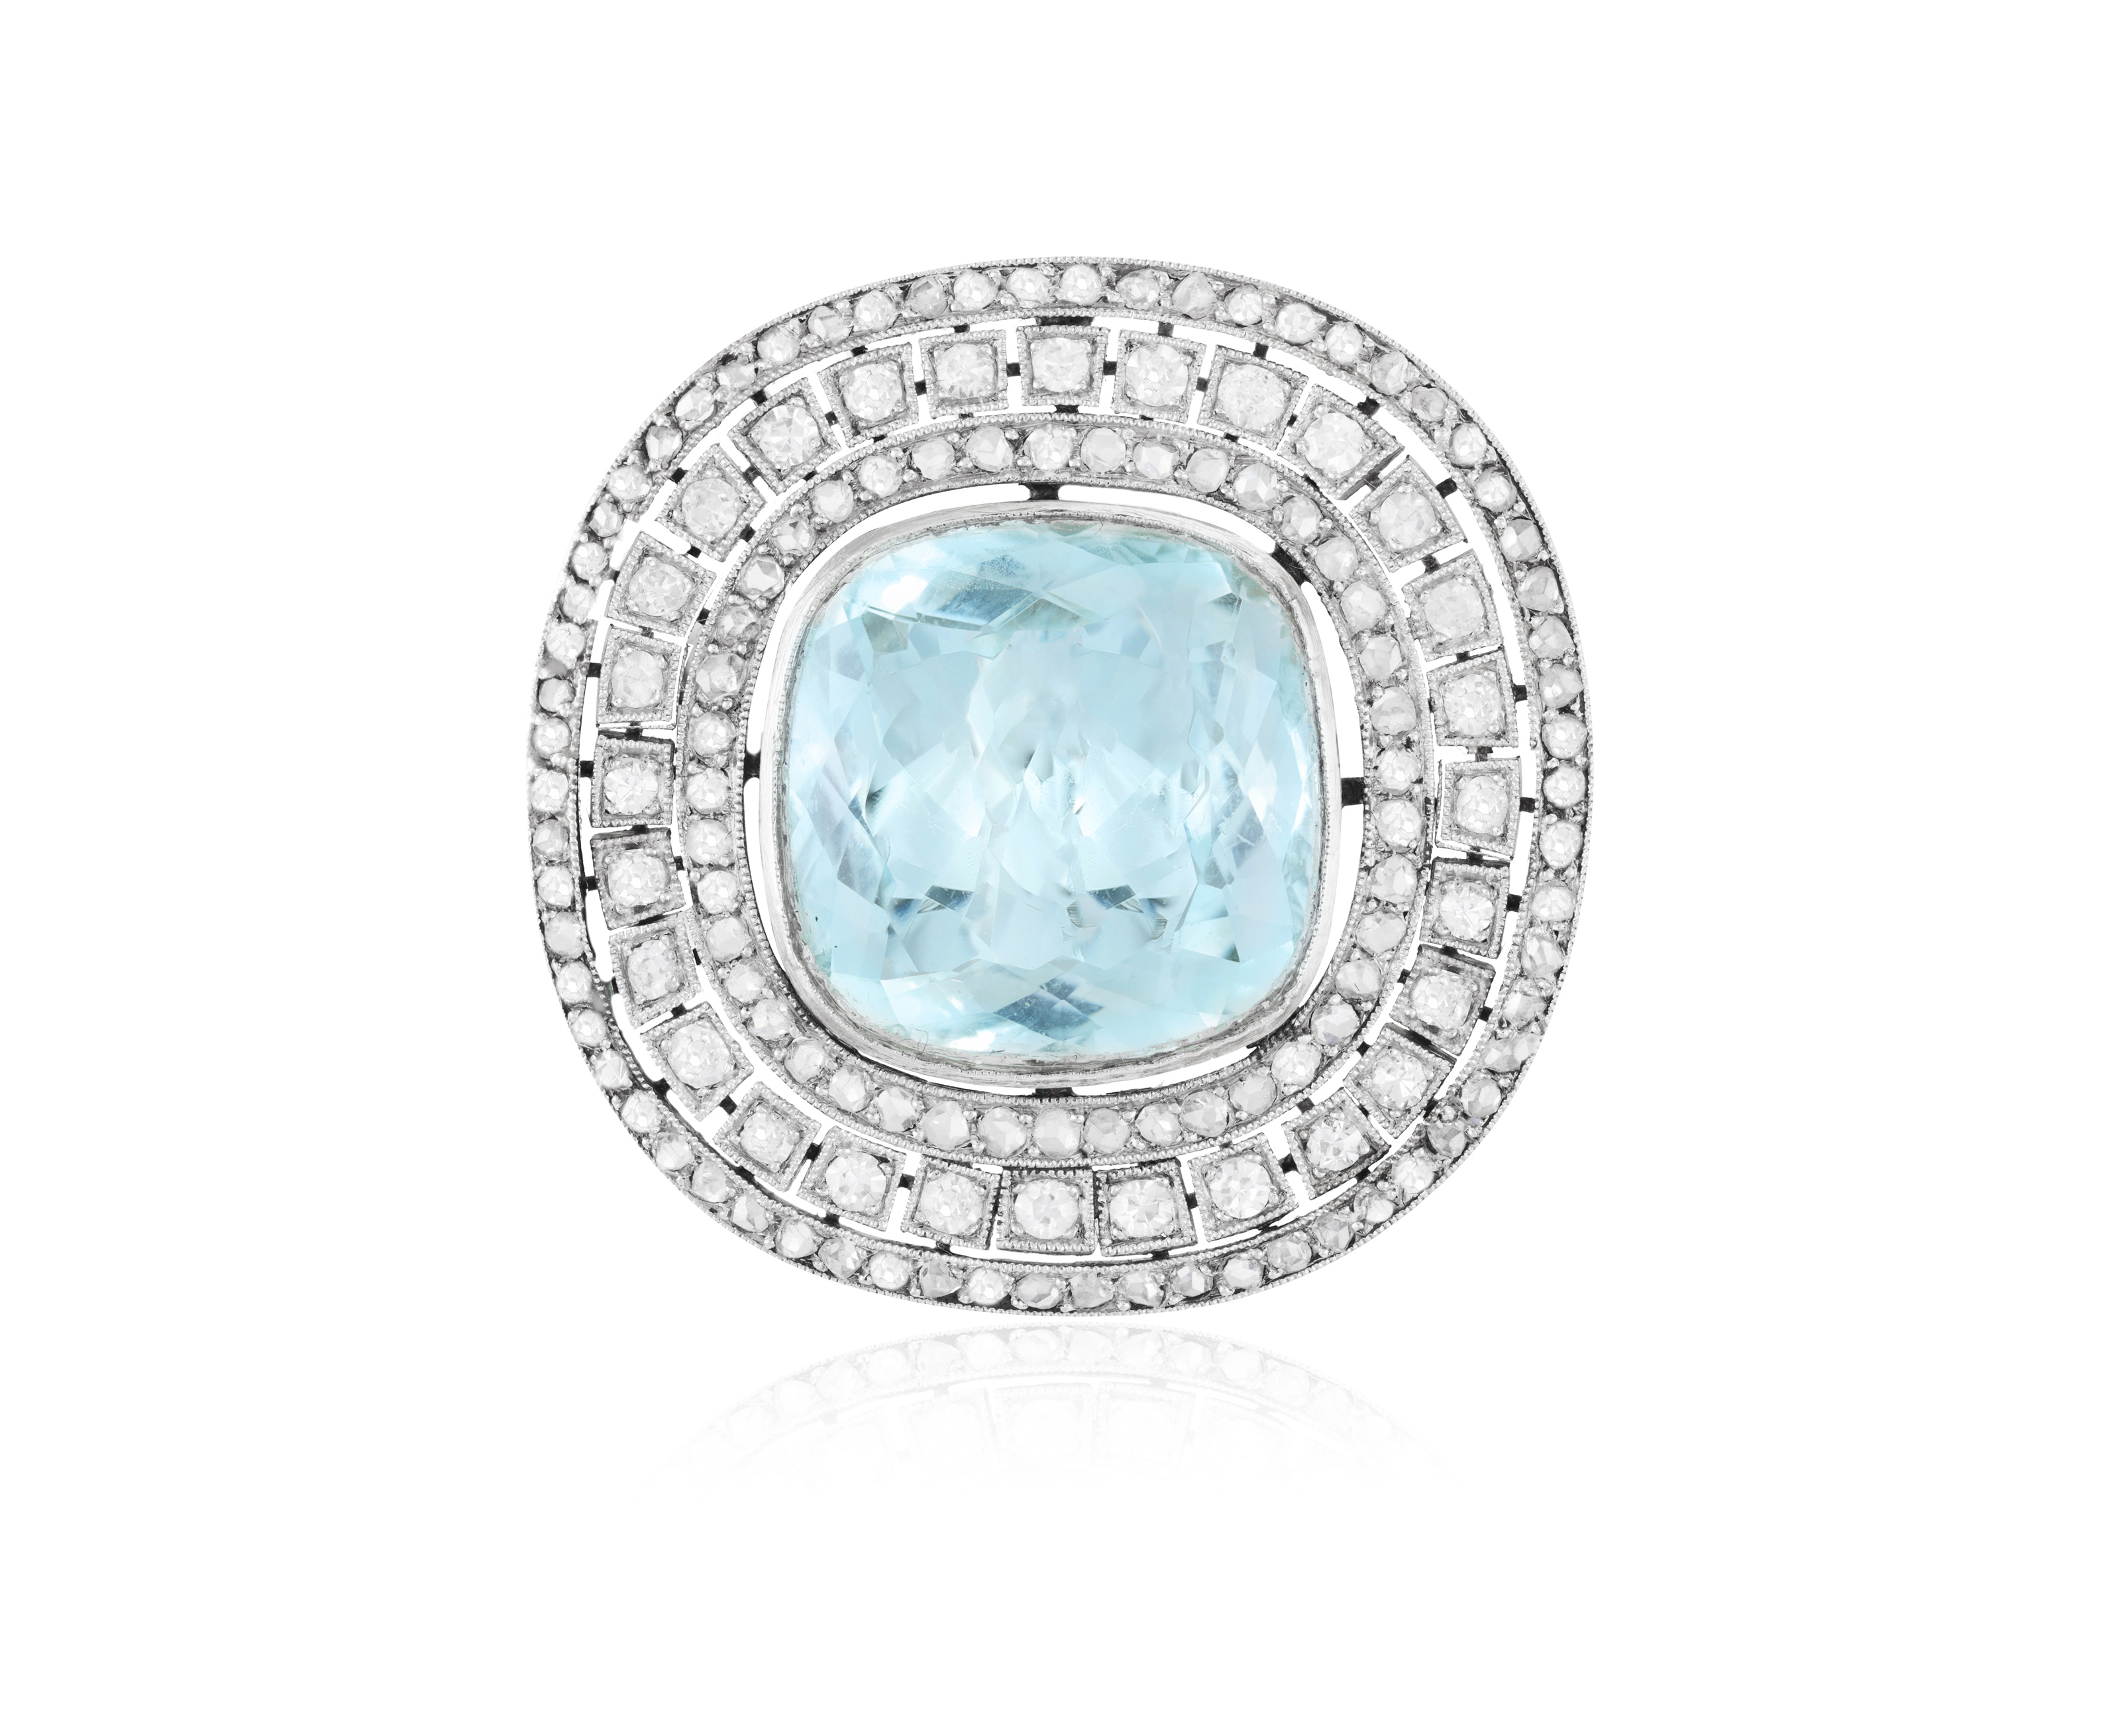 A LATE 19TH CENTURY/ EARLY 20TH CENTURY AQUAMARINE AND DIAMOND CLIP Set with a cushion-shaped